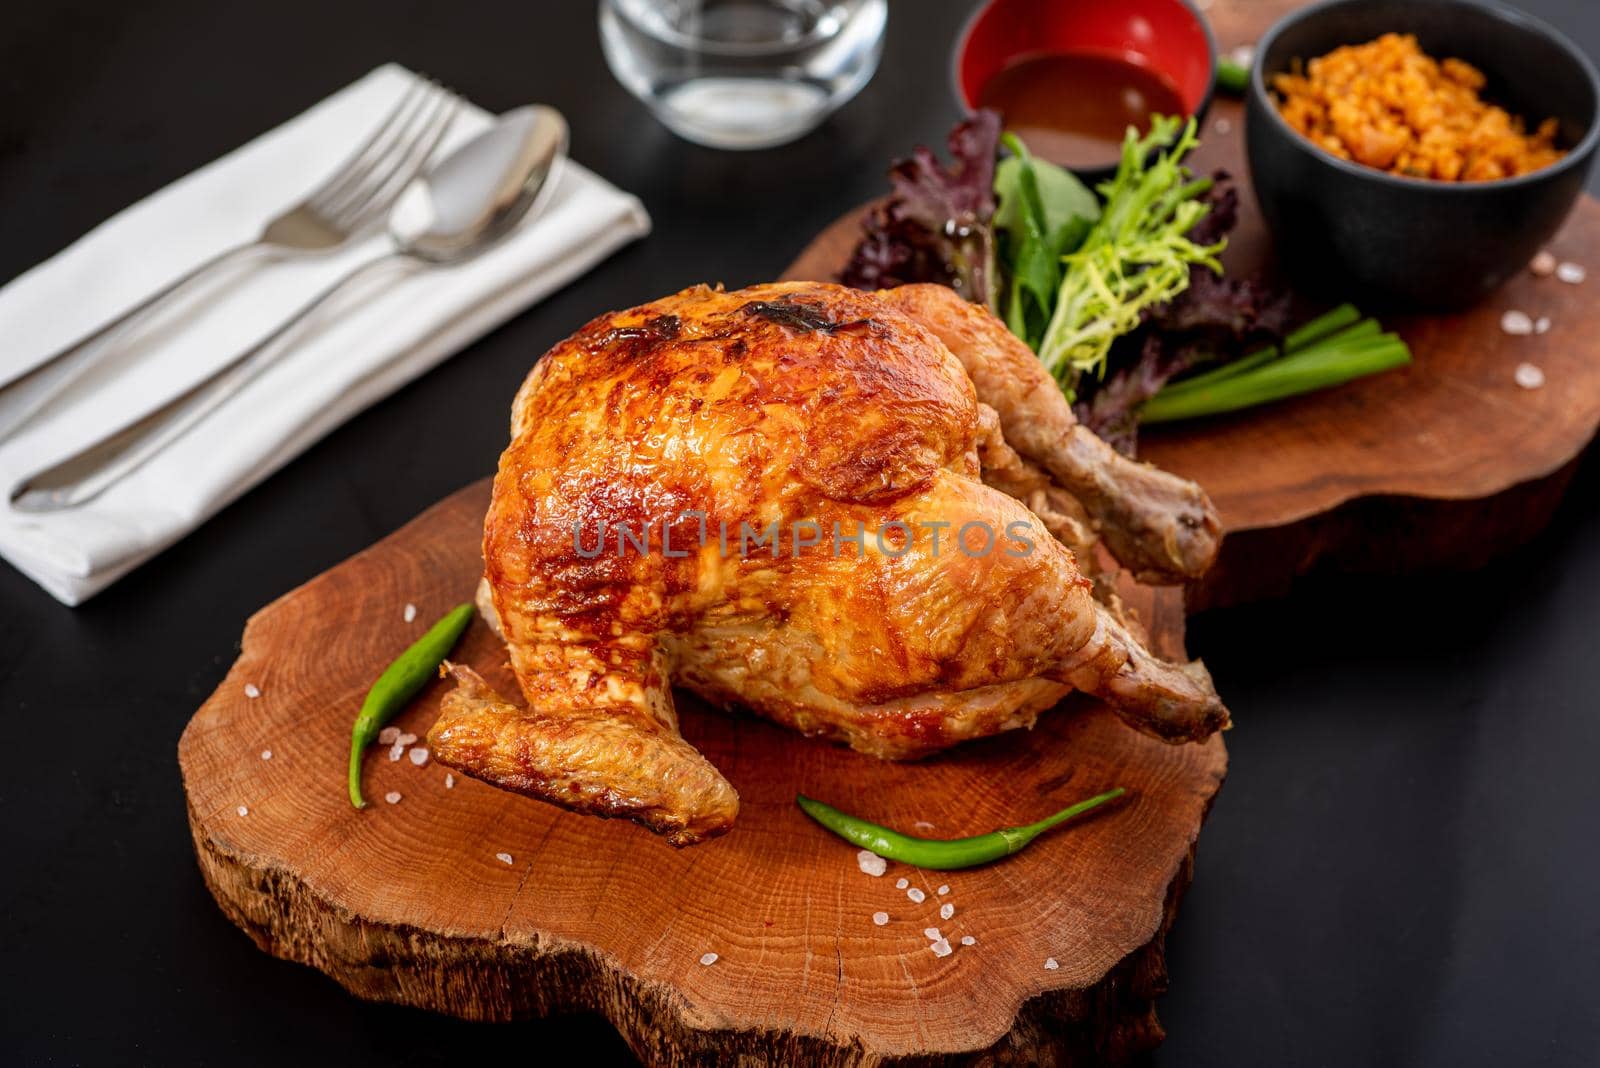 Roasted whole chicken cooked on charcoal with bulgur pilaf on wooden board. by Sonat